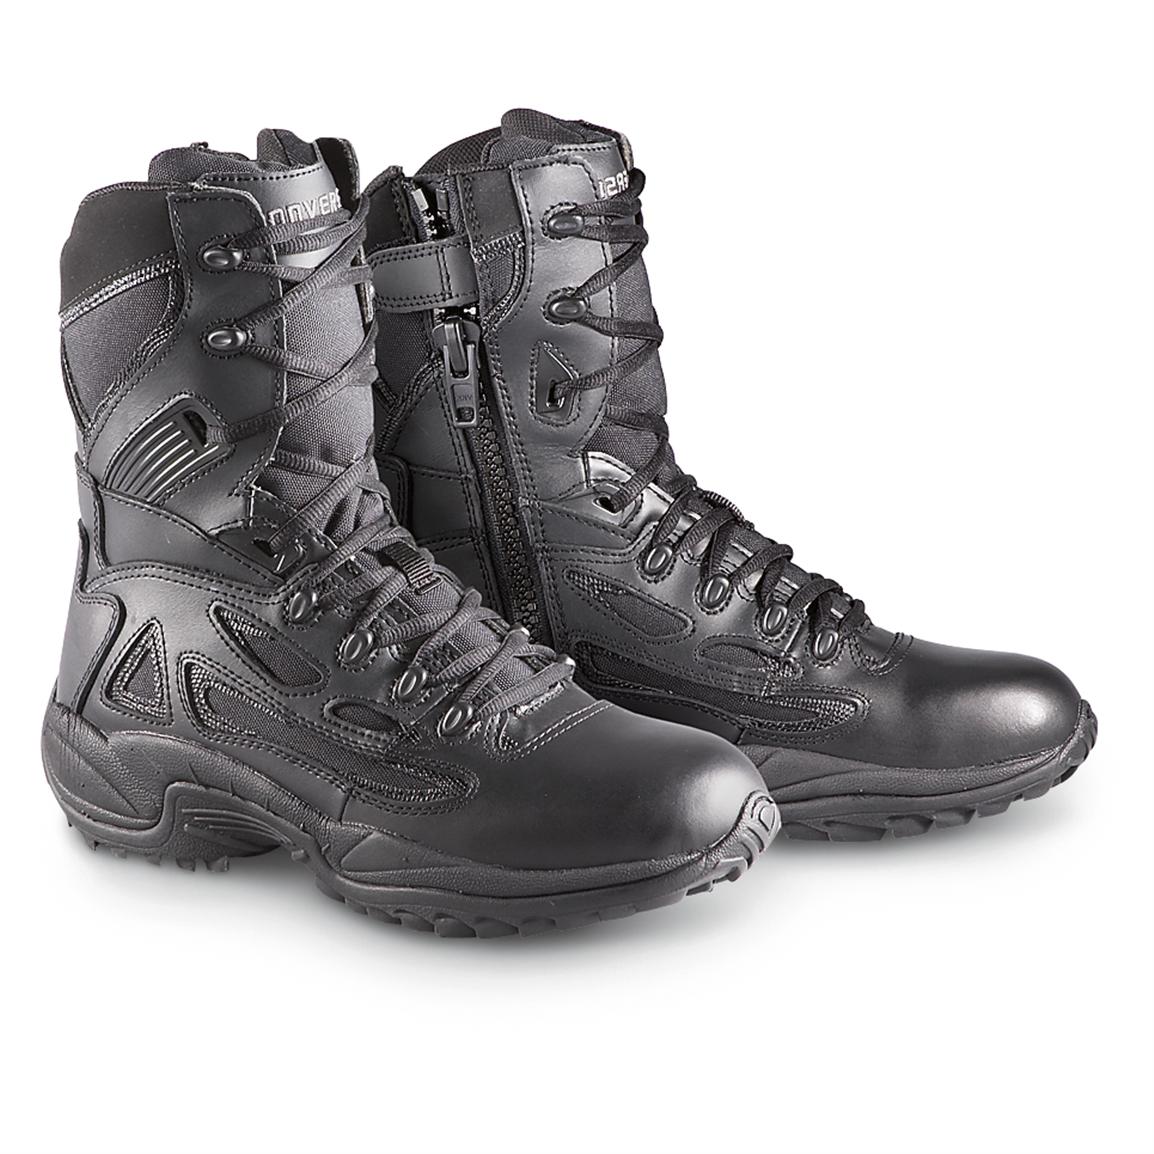 Converse® 8" Side - zip Duty Boots, Black - 188535, Tactical Boots Sportsman's Guide